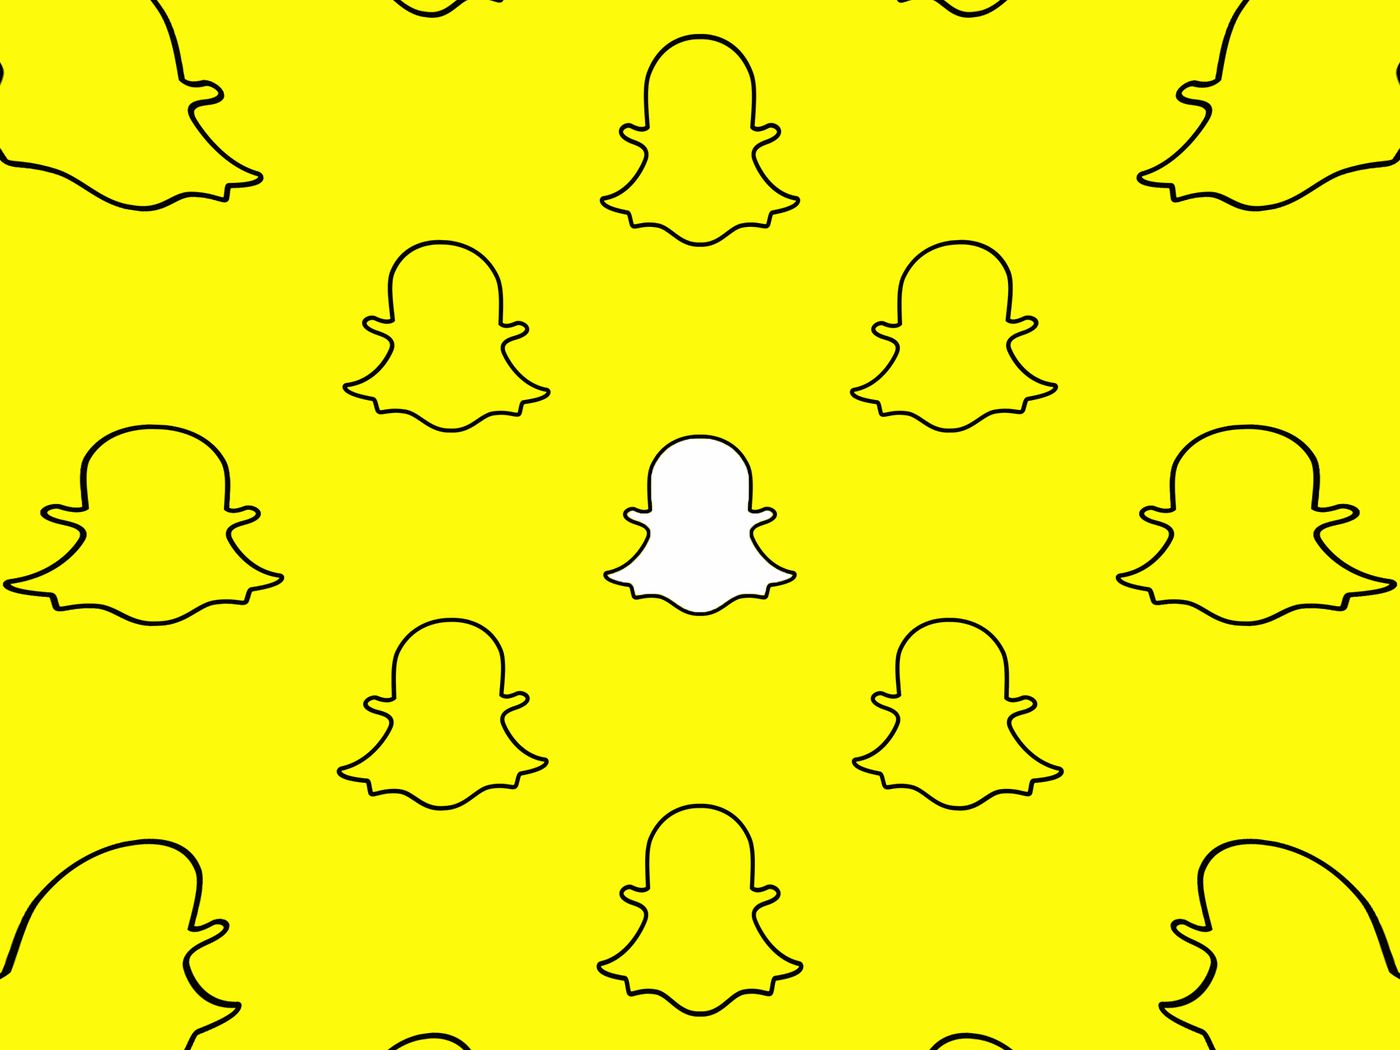 Snapchat is growing faster than it has in years - The Verge